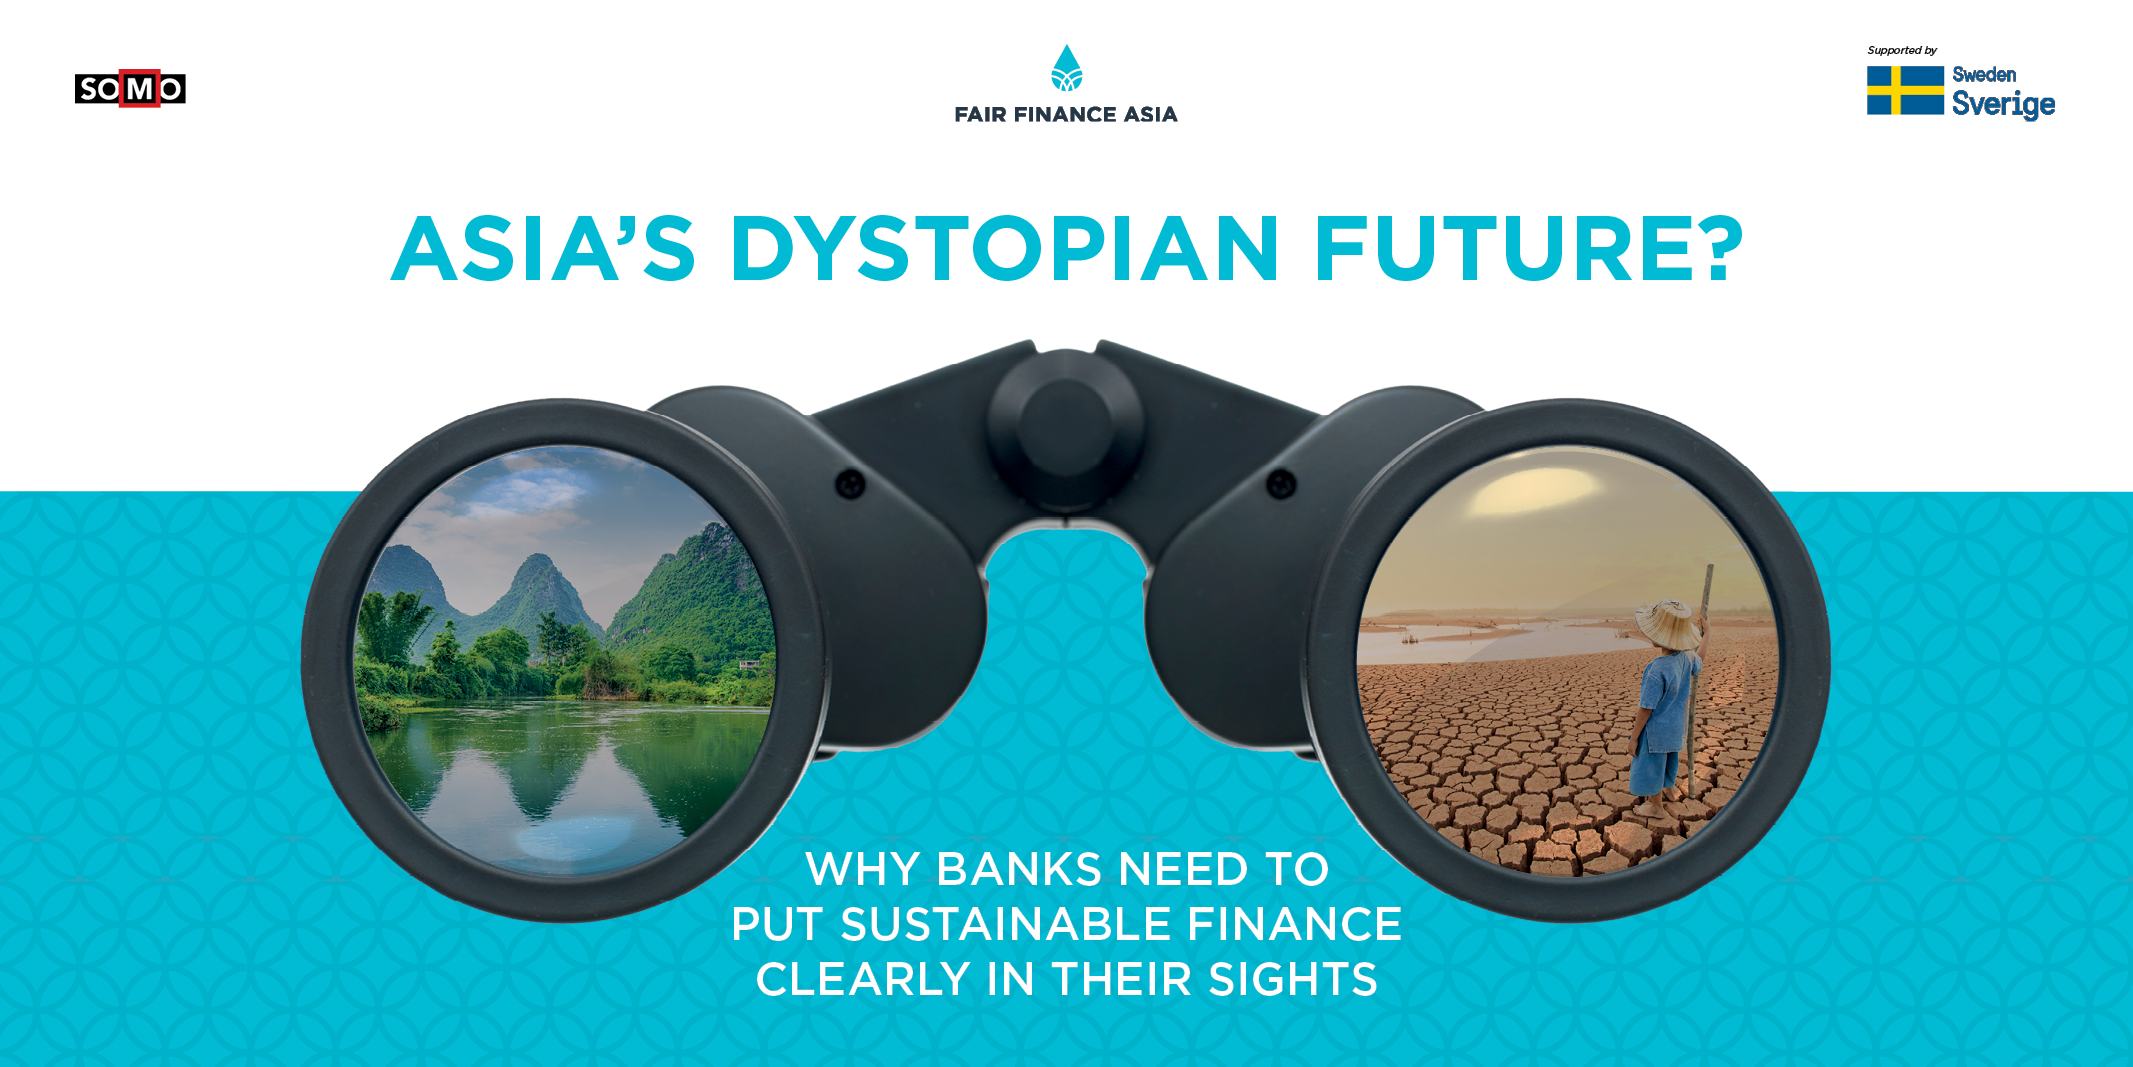 PRESS RELEASE: ASIA’S DYSTOPIAN FUTURE – BANKS NEED TO PUT SUSTAINABLE FINANCE CLEARLY IN THEIR SIGHTS